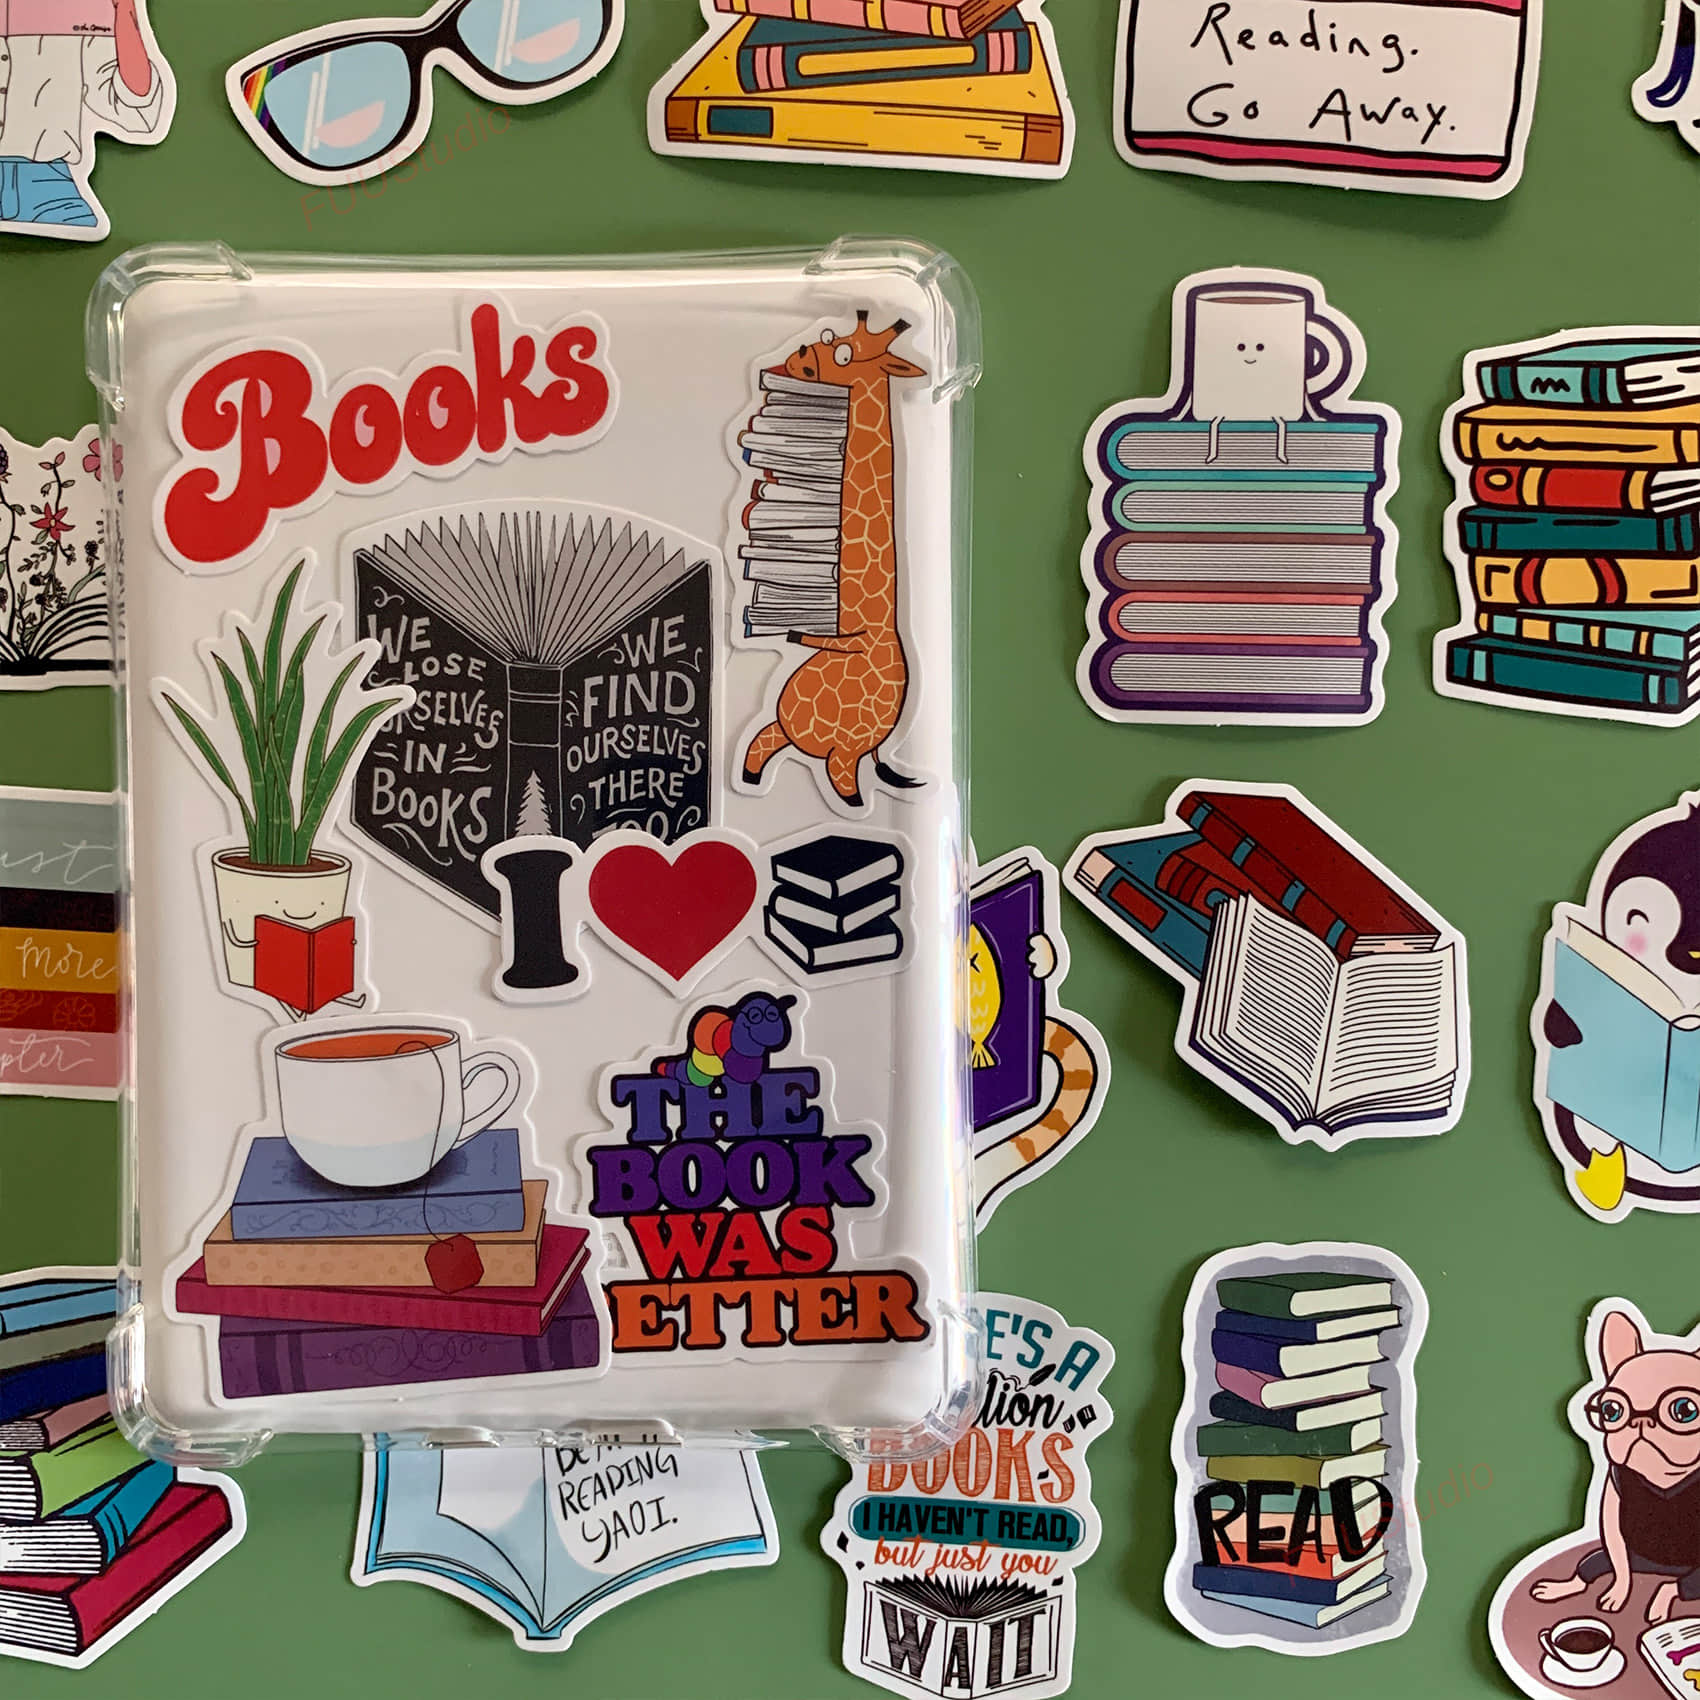 Reading and Books Sticker Pack 50 pieces -Part 2-FUU Studio